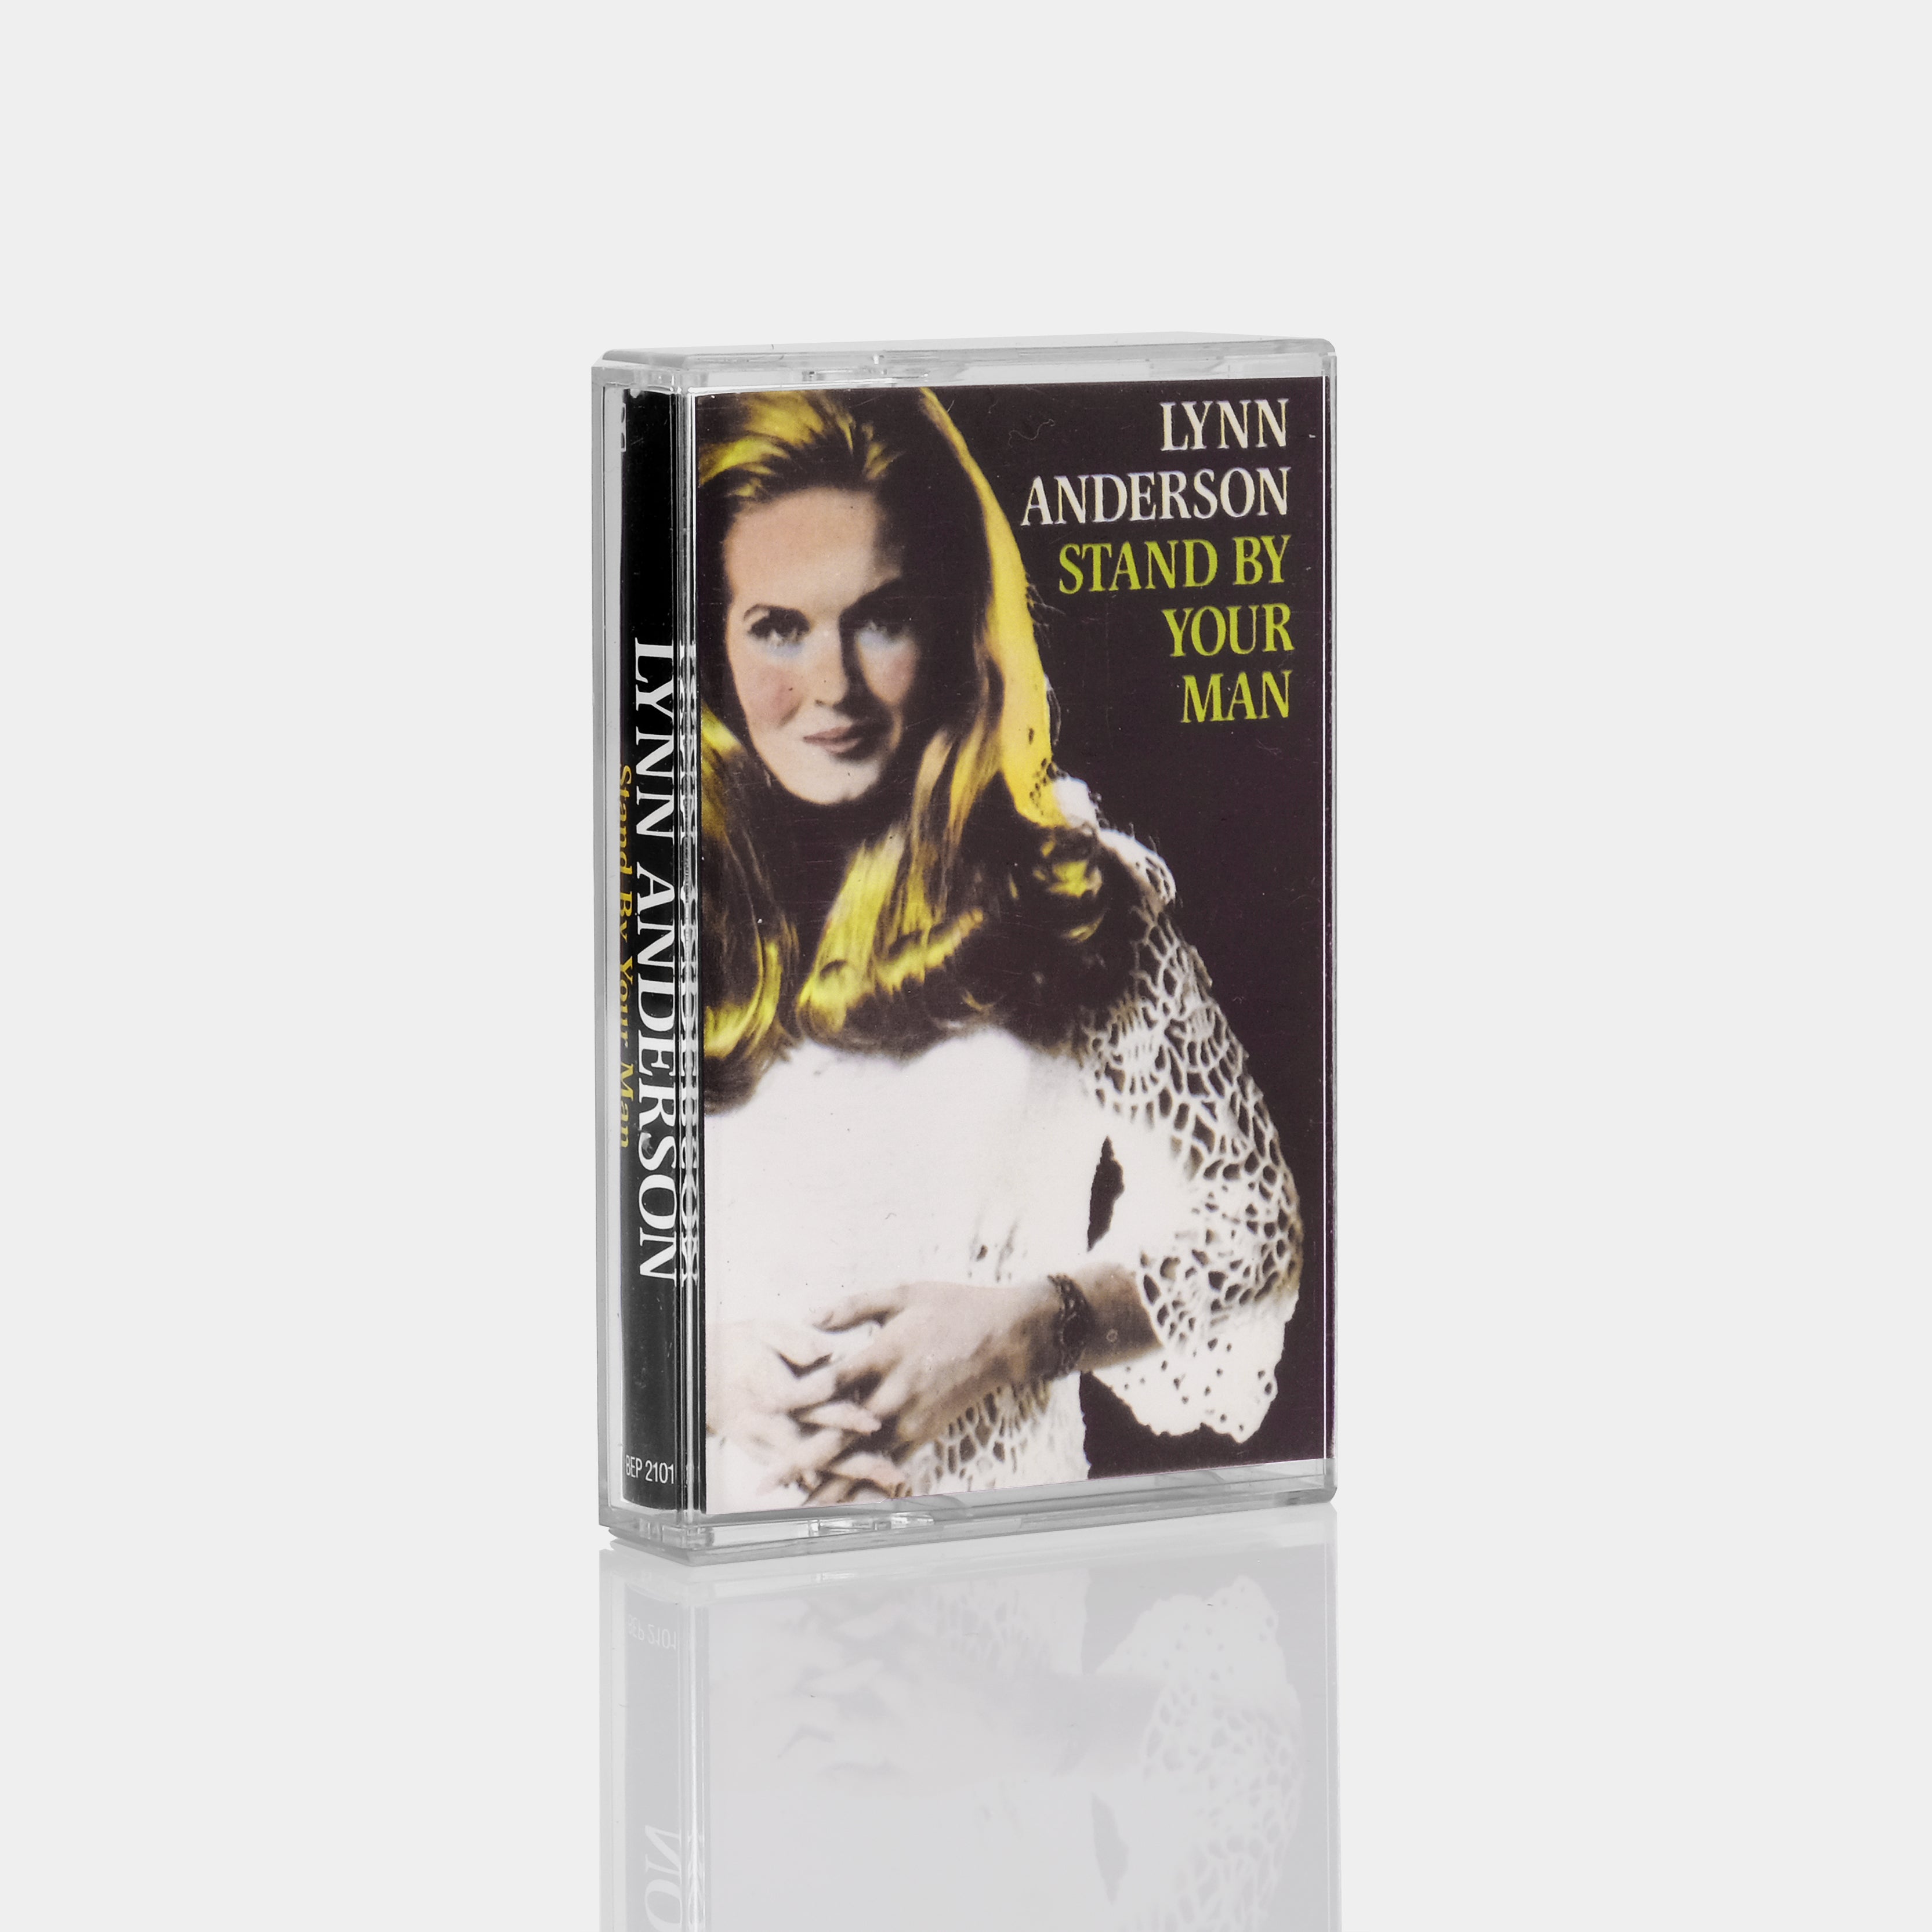 Lynn Anderson - Stand By Your Man Cassette Tape